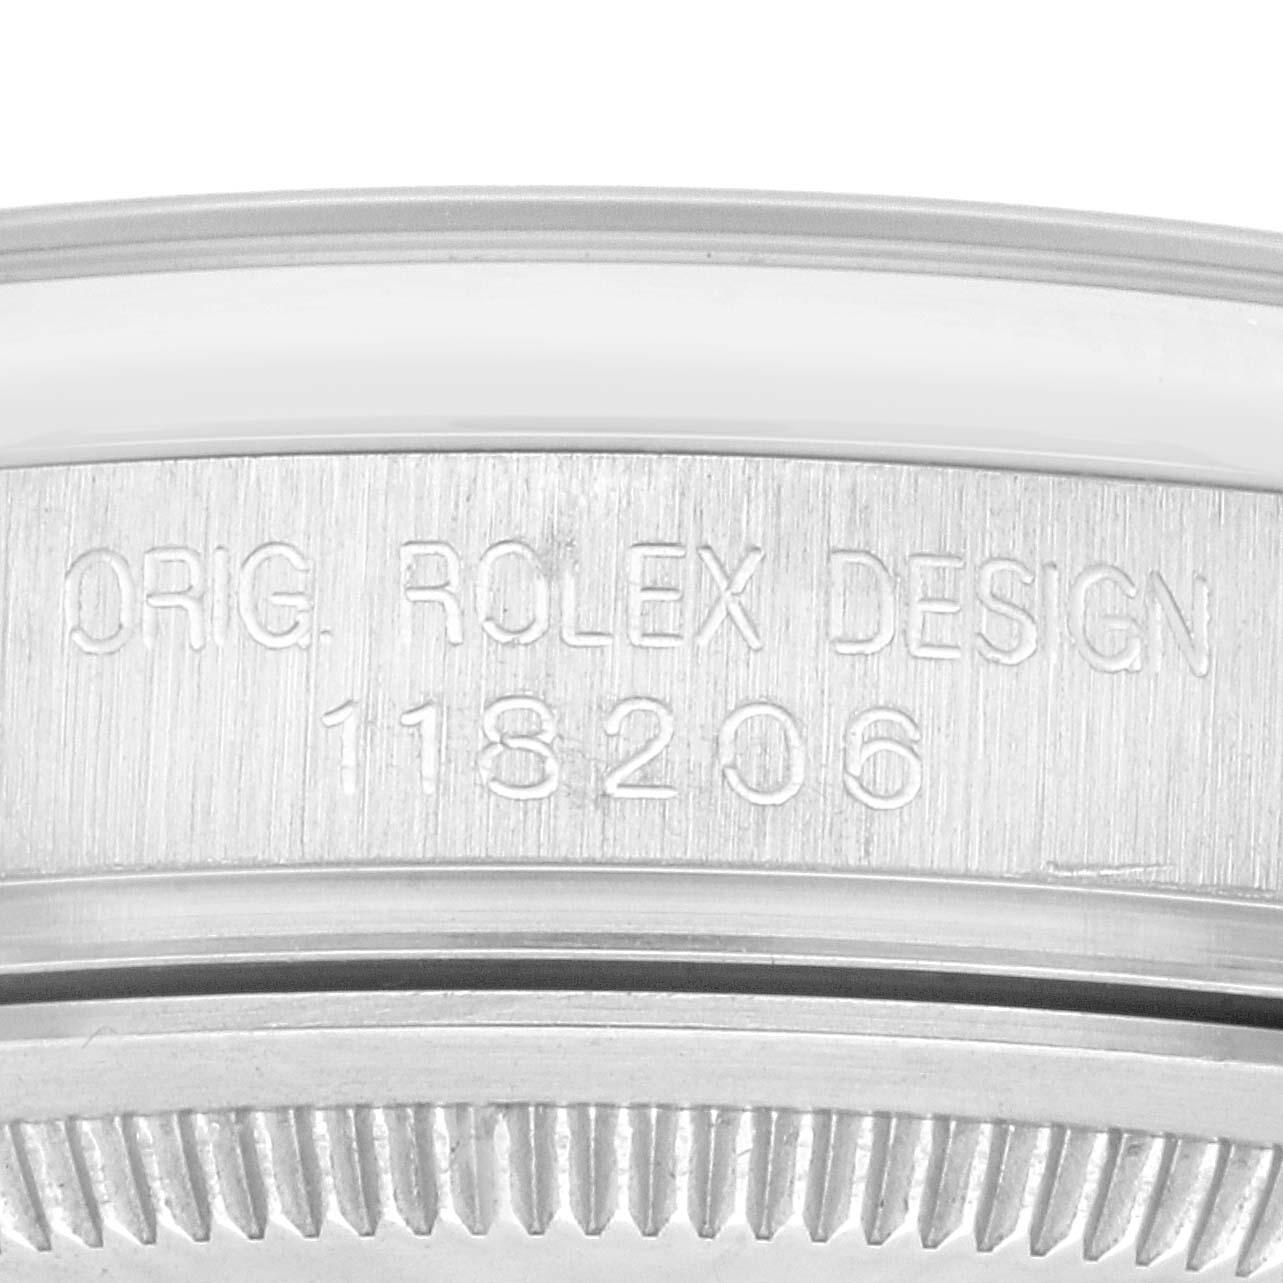 Rolex Day-Date President Diamond Dial Platinum Mens Watch 118206 Box Papers. Officially certified chronometer automatic self-winding movement with quickset date function. Platinum oyster case 36.0 mm in diameter. Rolex logo on the crown. Platinum